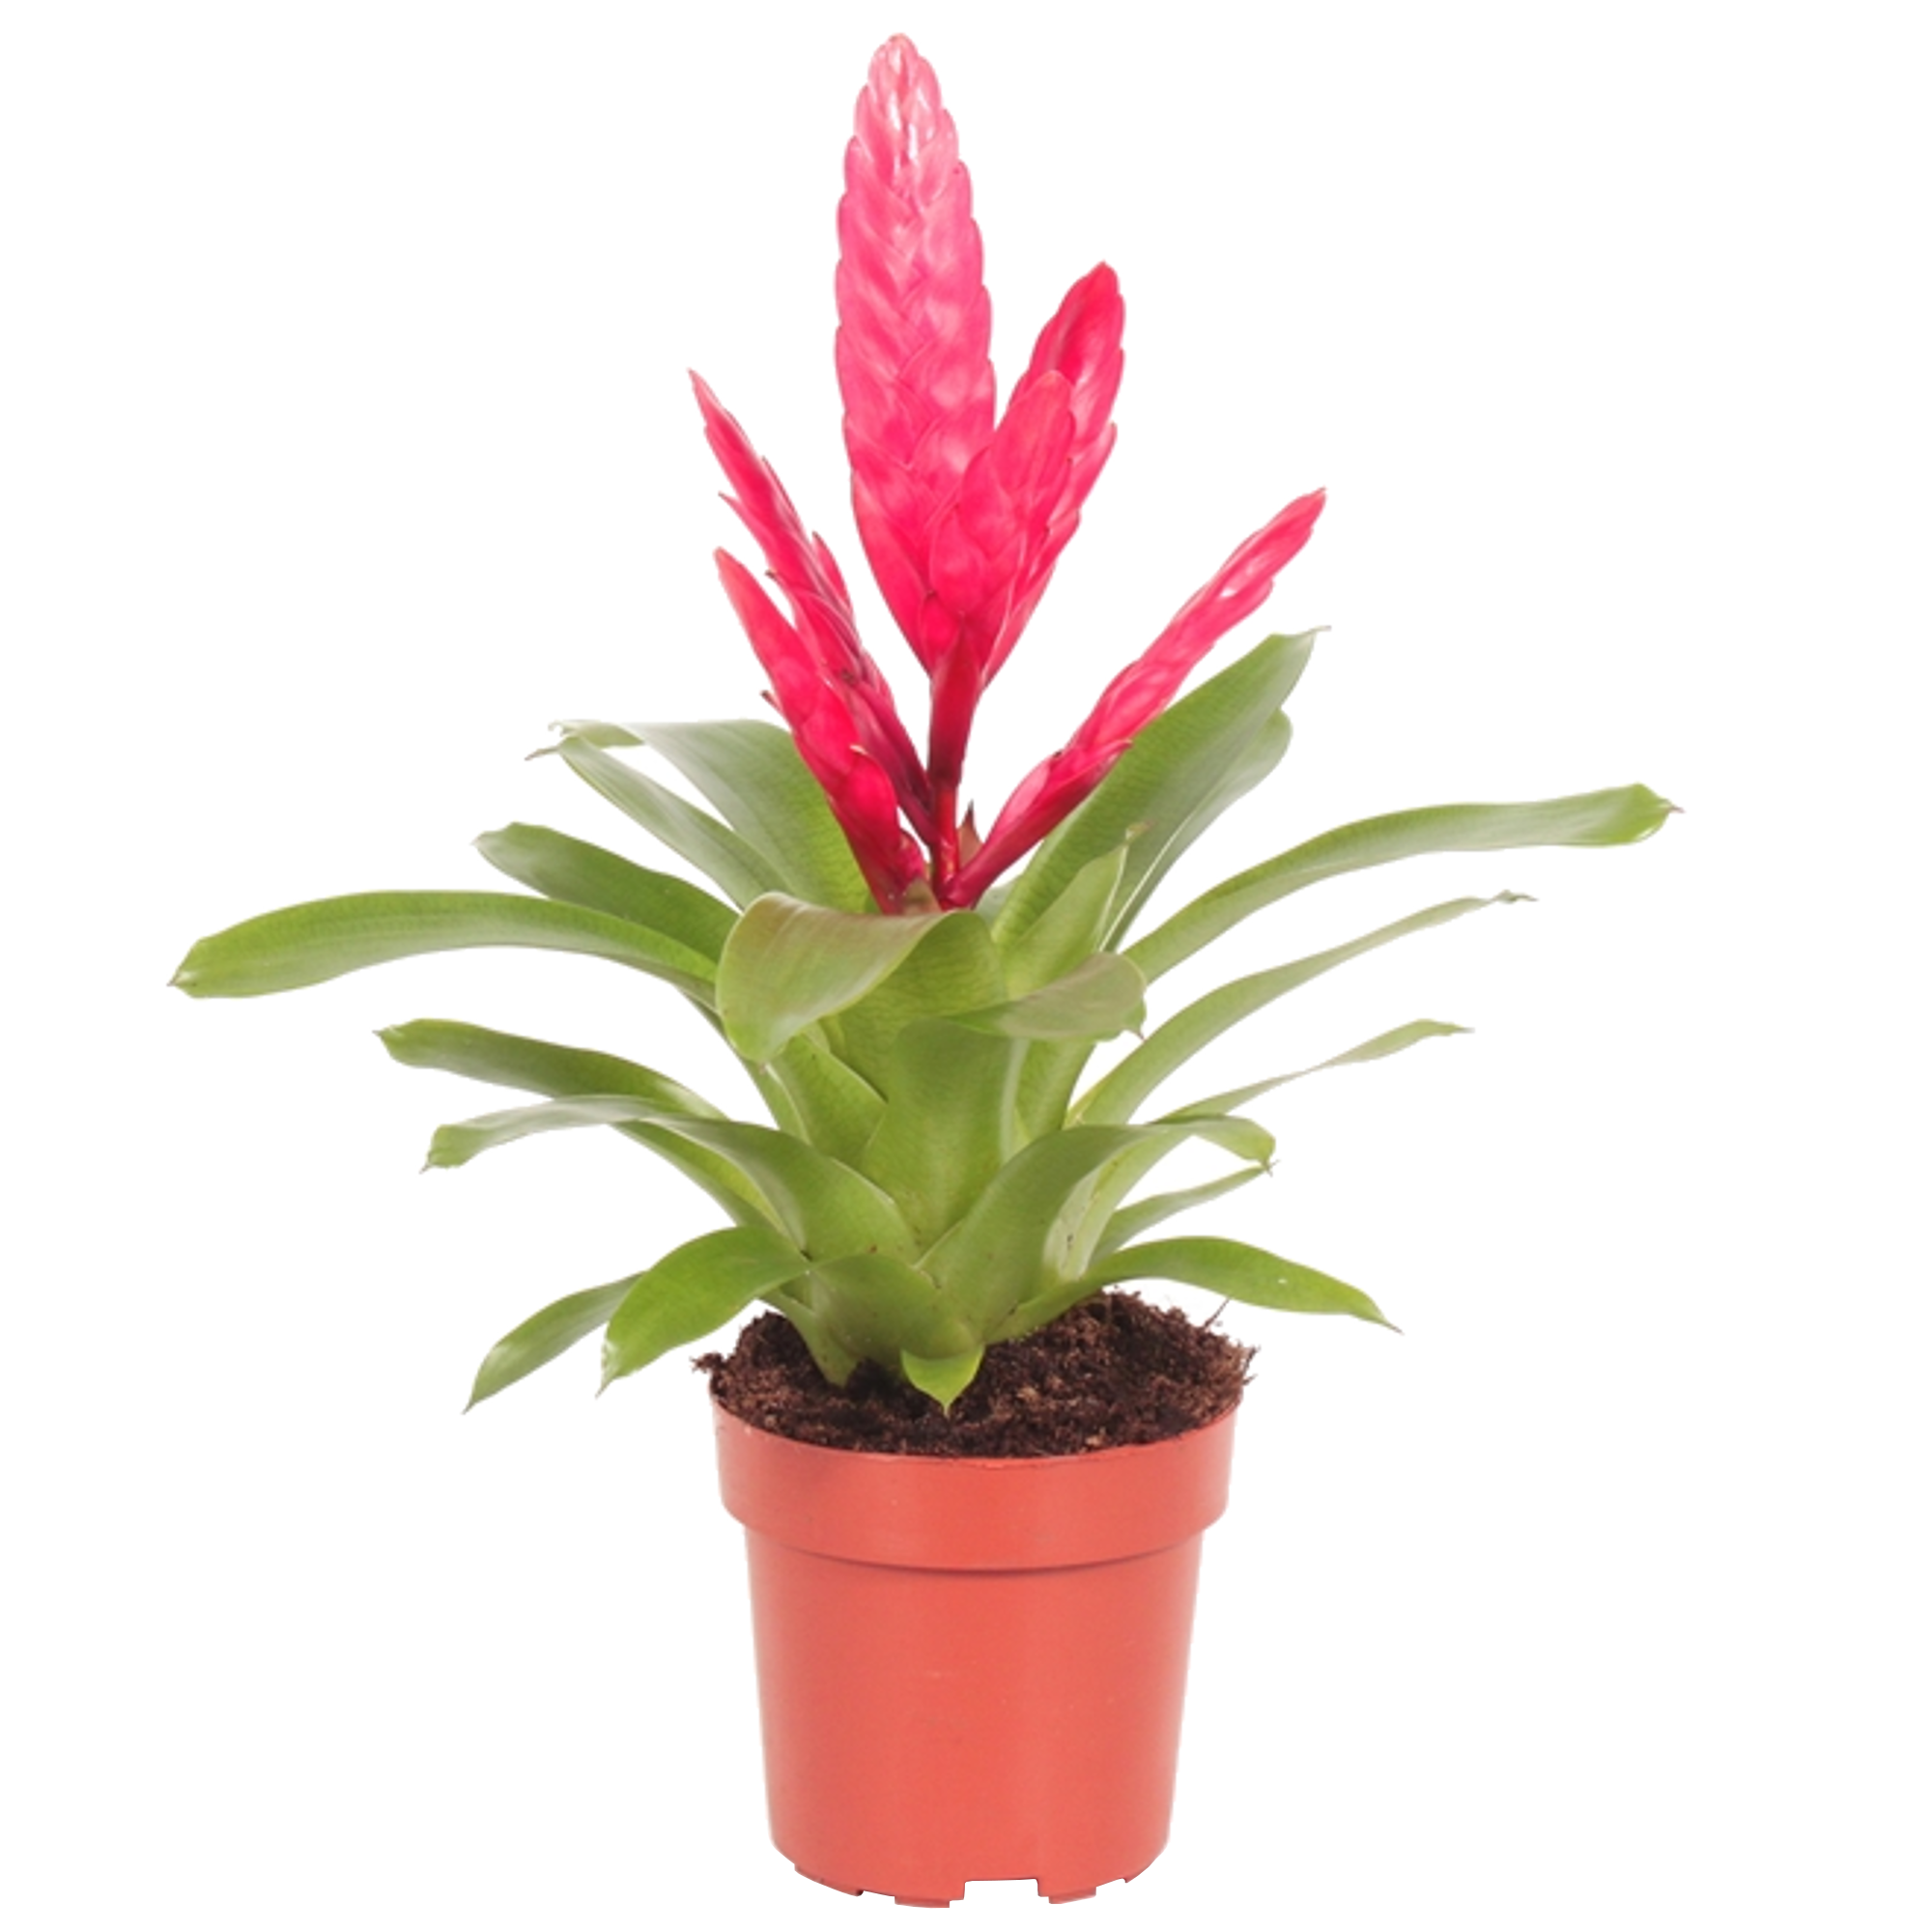 Flammendes Schwert 'Intenso' pink 12 cm Topf + product picture